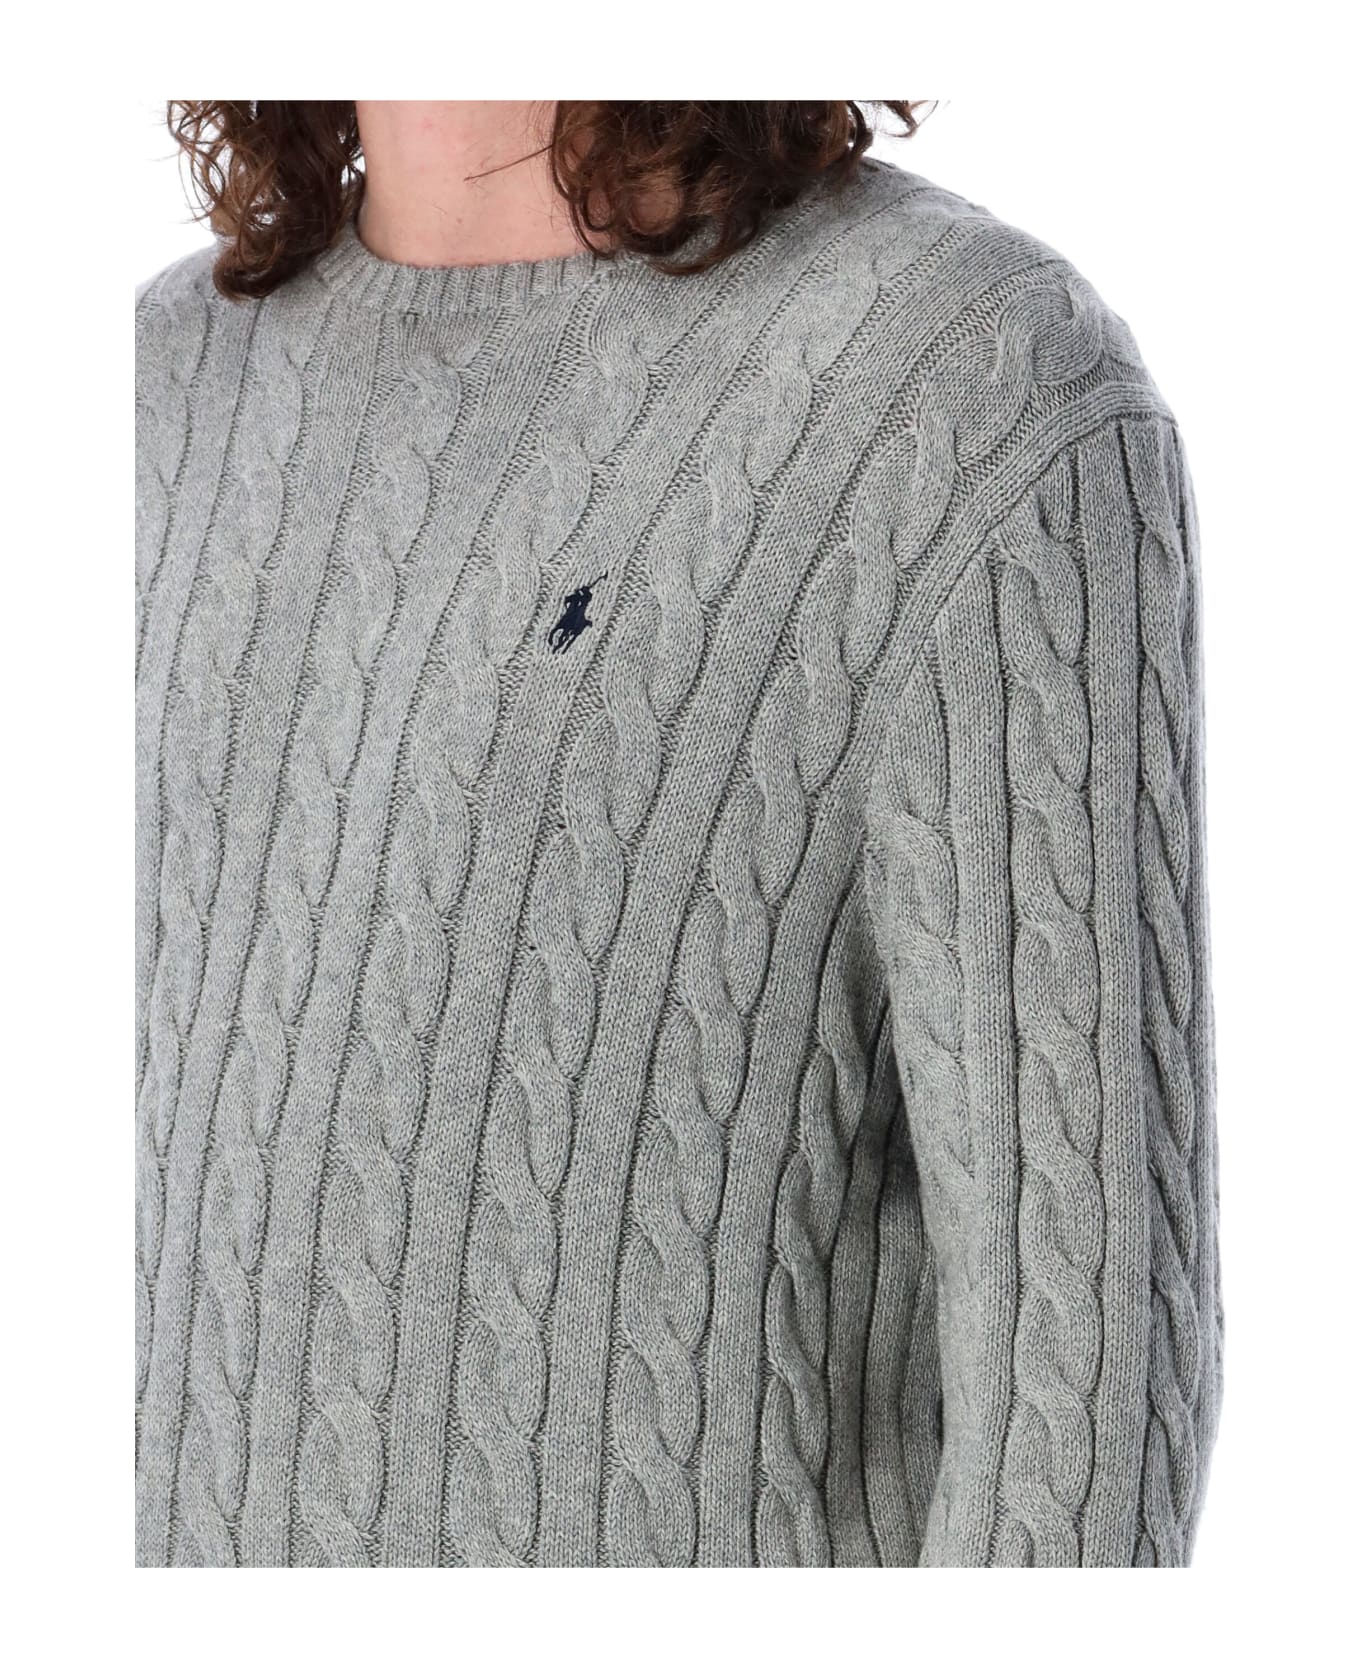 Polo Ralph Lauren Cable Knit Sweater - GREY